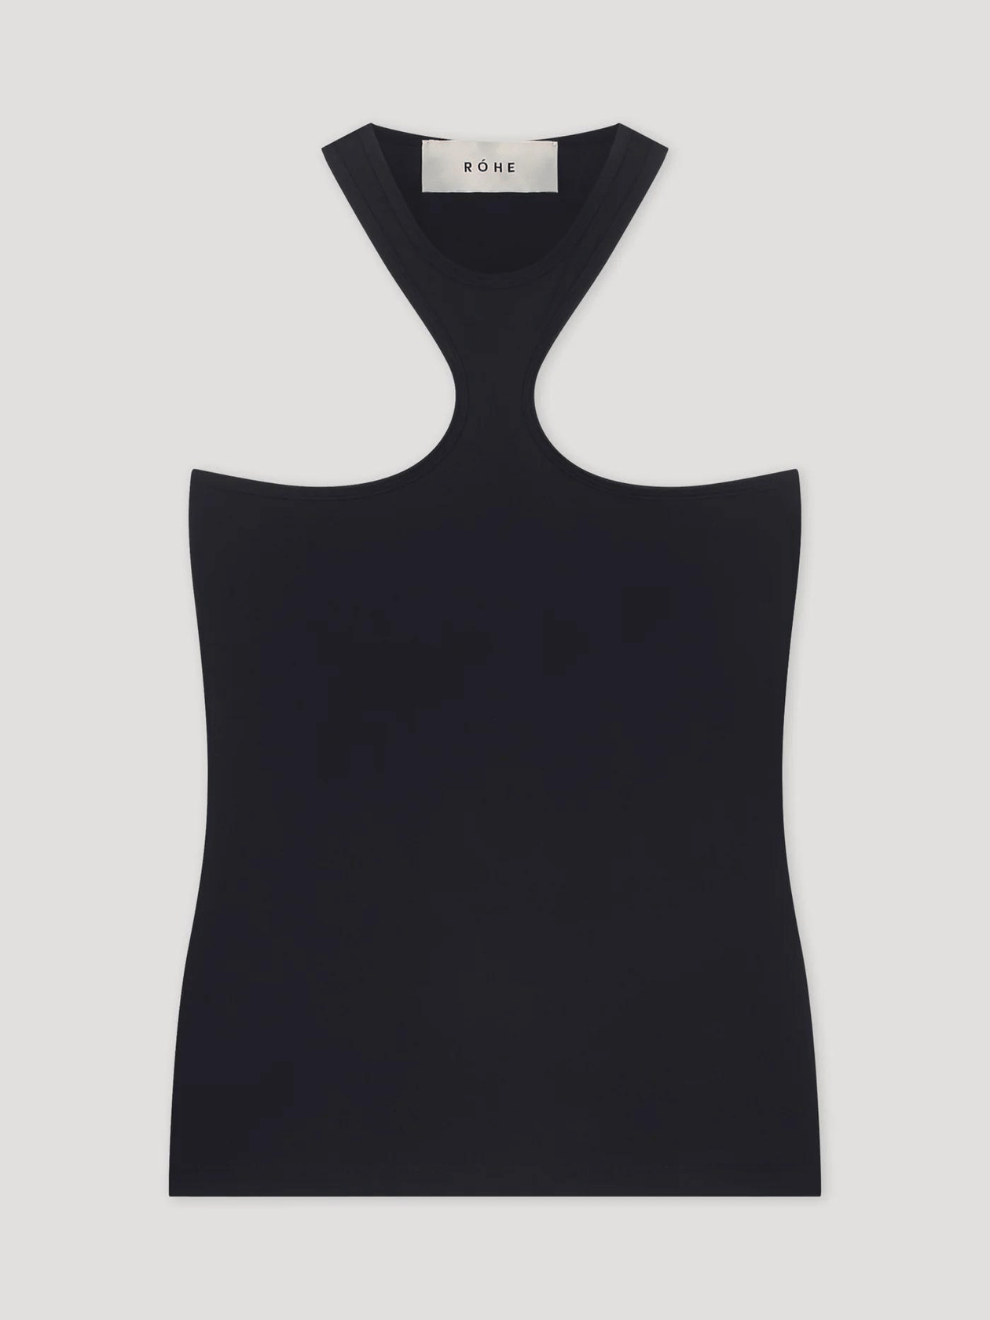 Shaped Technical Top in Black